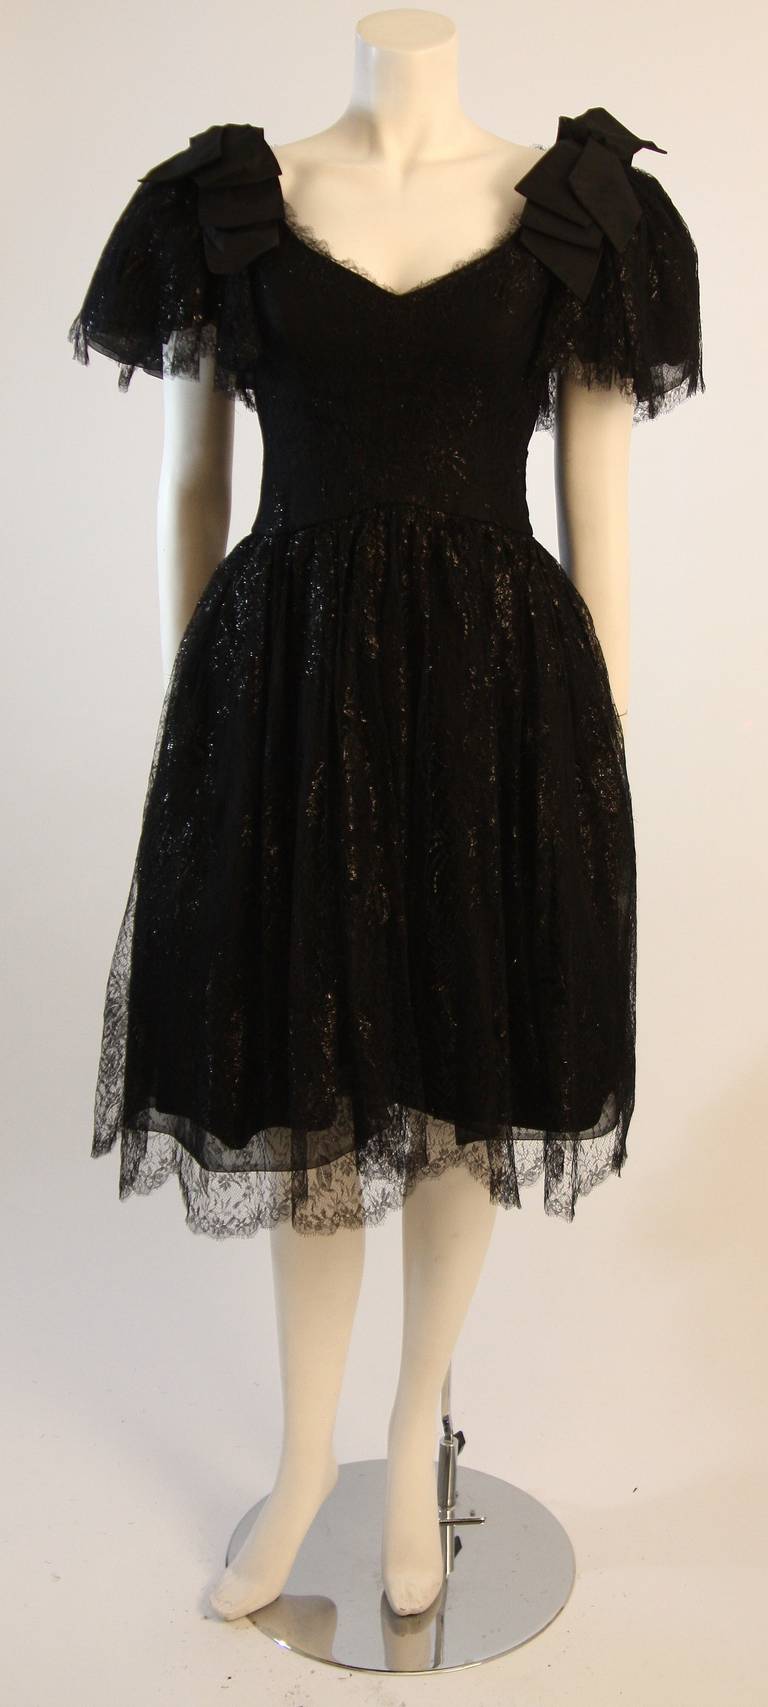 This is a lovely Nolan Miller cocktail dress. This dress is composed of a fantastic black supple lace with a subtle metallic attribute. It features a wonderful V-Bust line and draped sleeves with bow accents. The dress has boning for structure and a